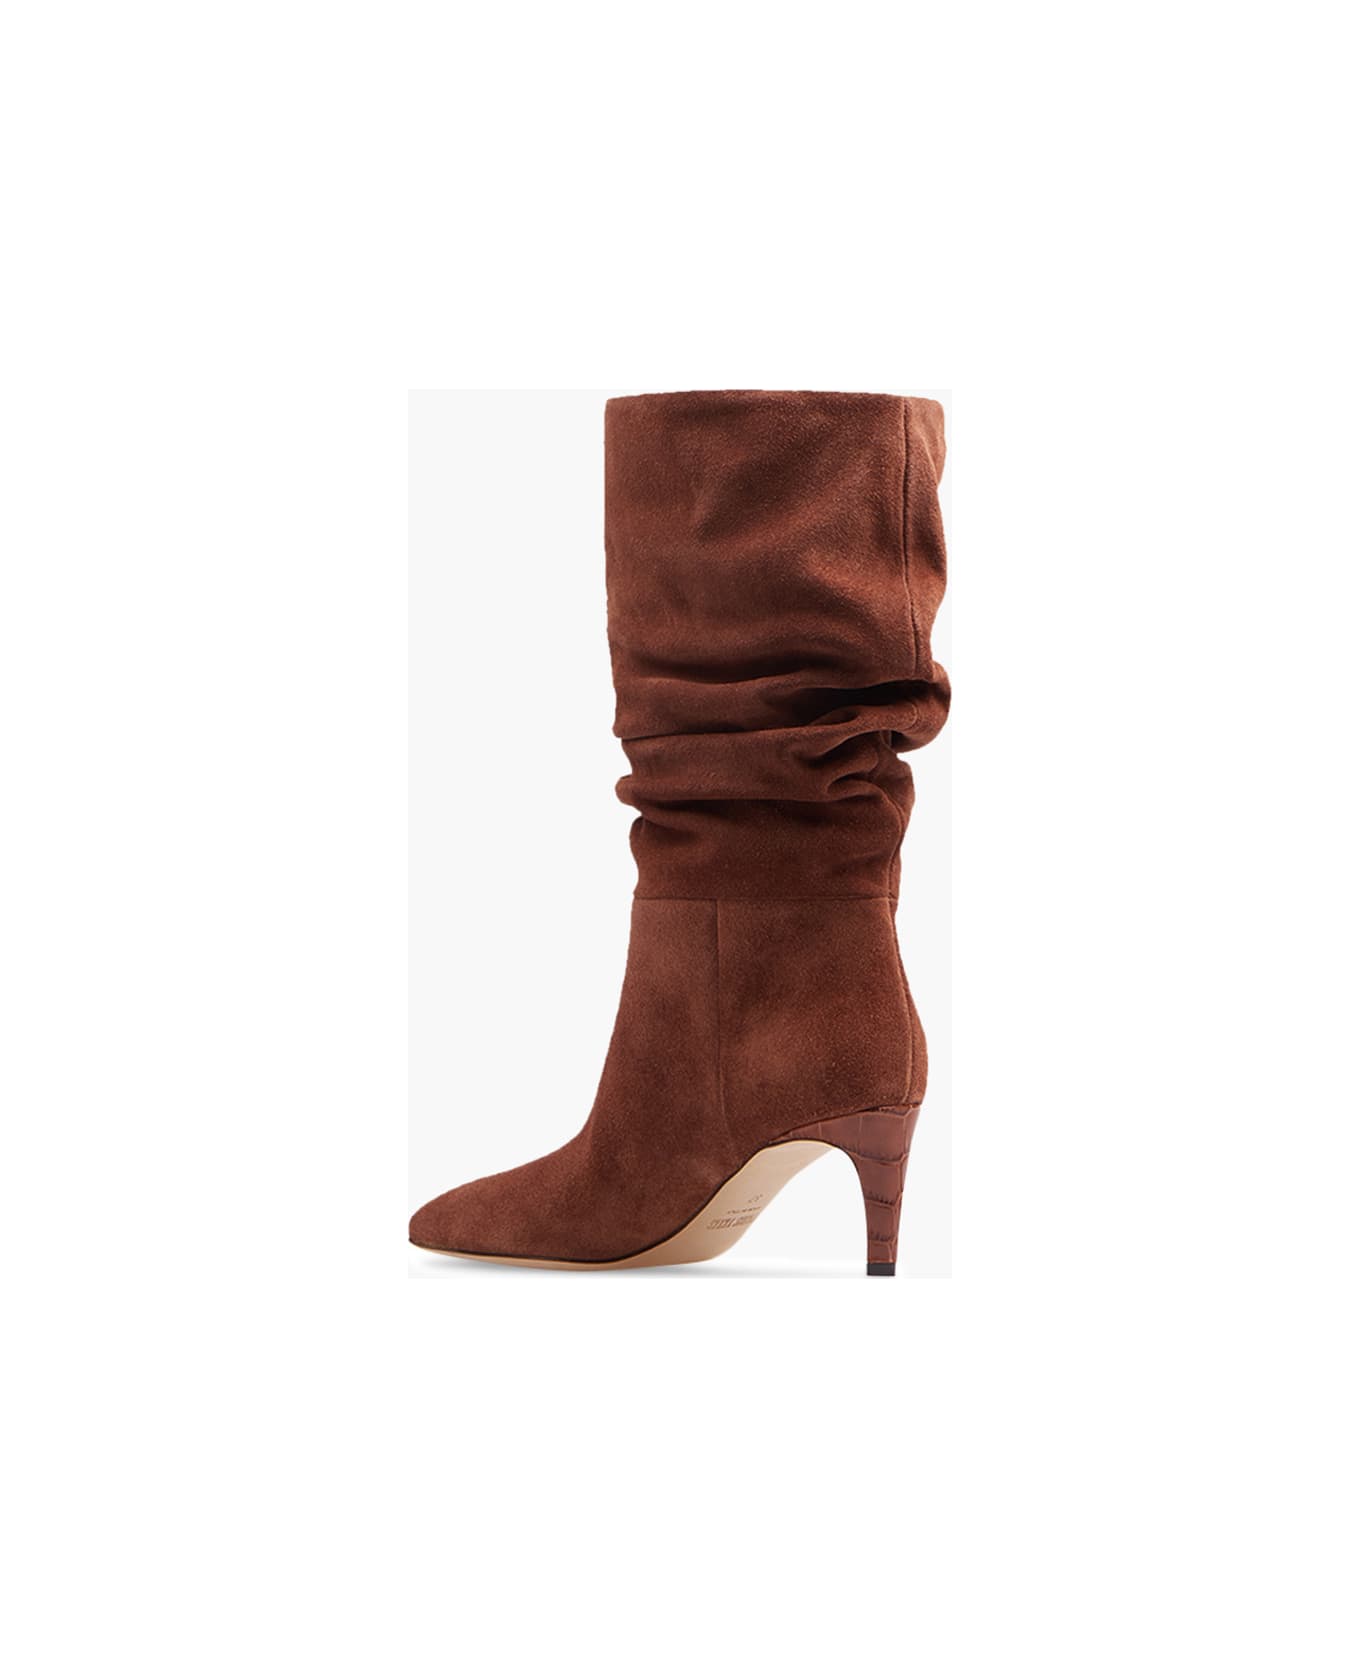 Paris Texas Slouchy Suede Boots - CANYON